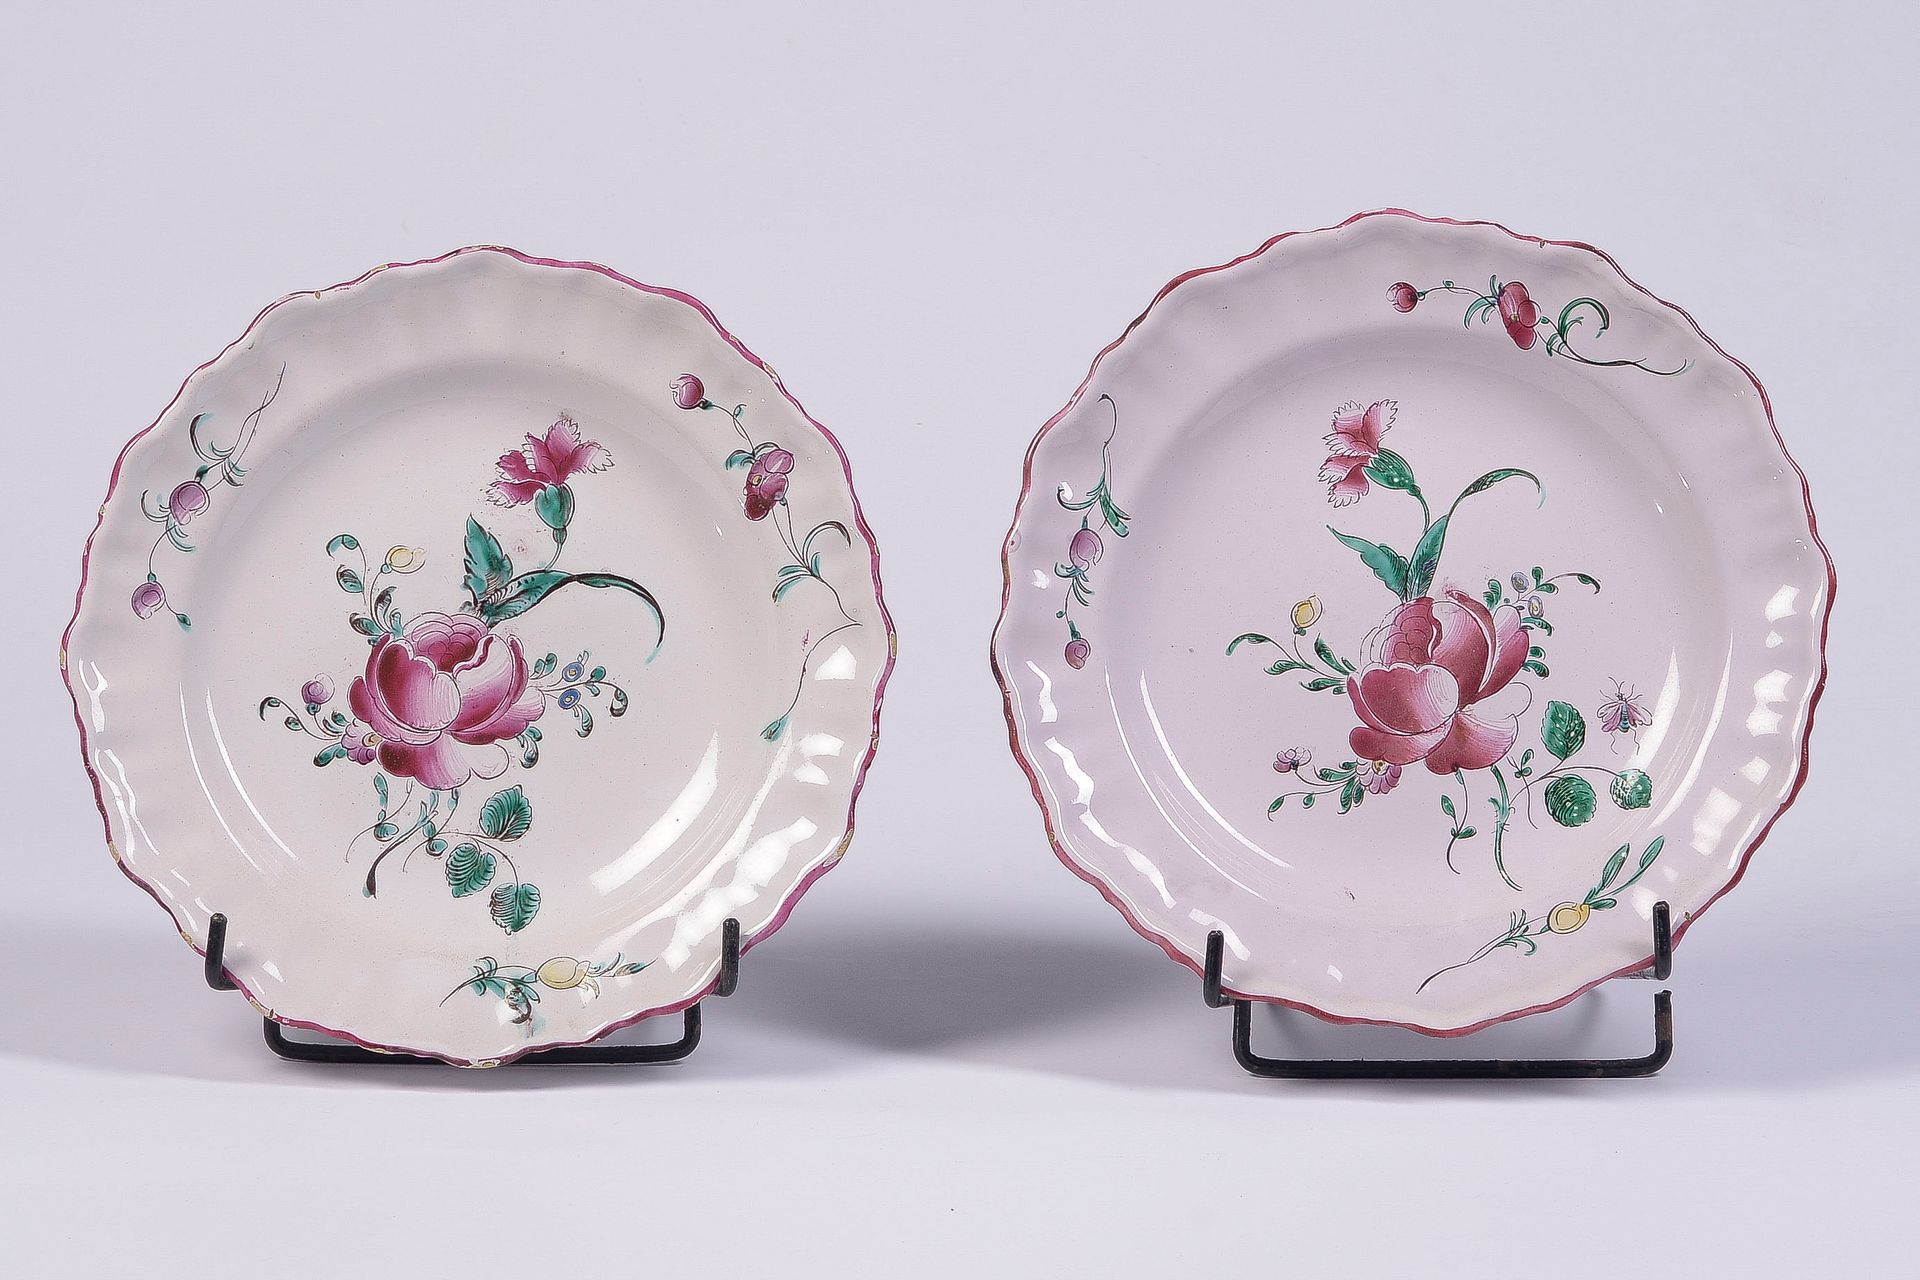 Null EAST OF FRANCE

Two earthenware plates with polychrome floral and insect de&hellip;